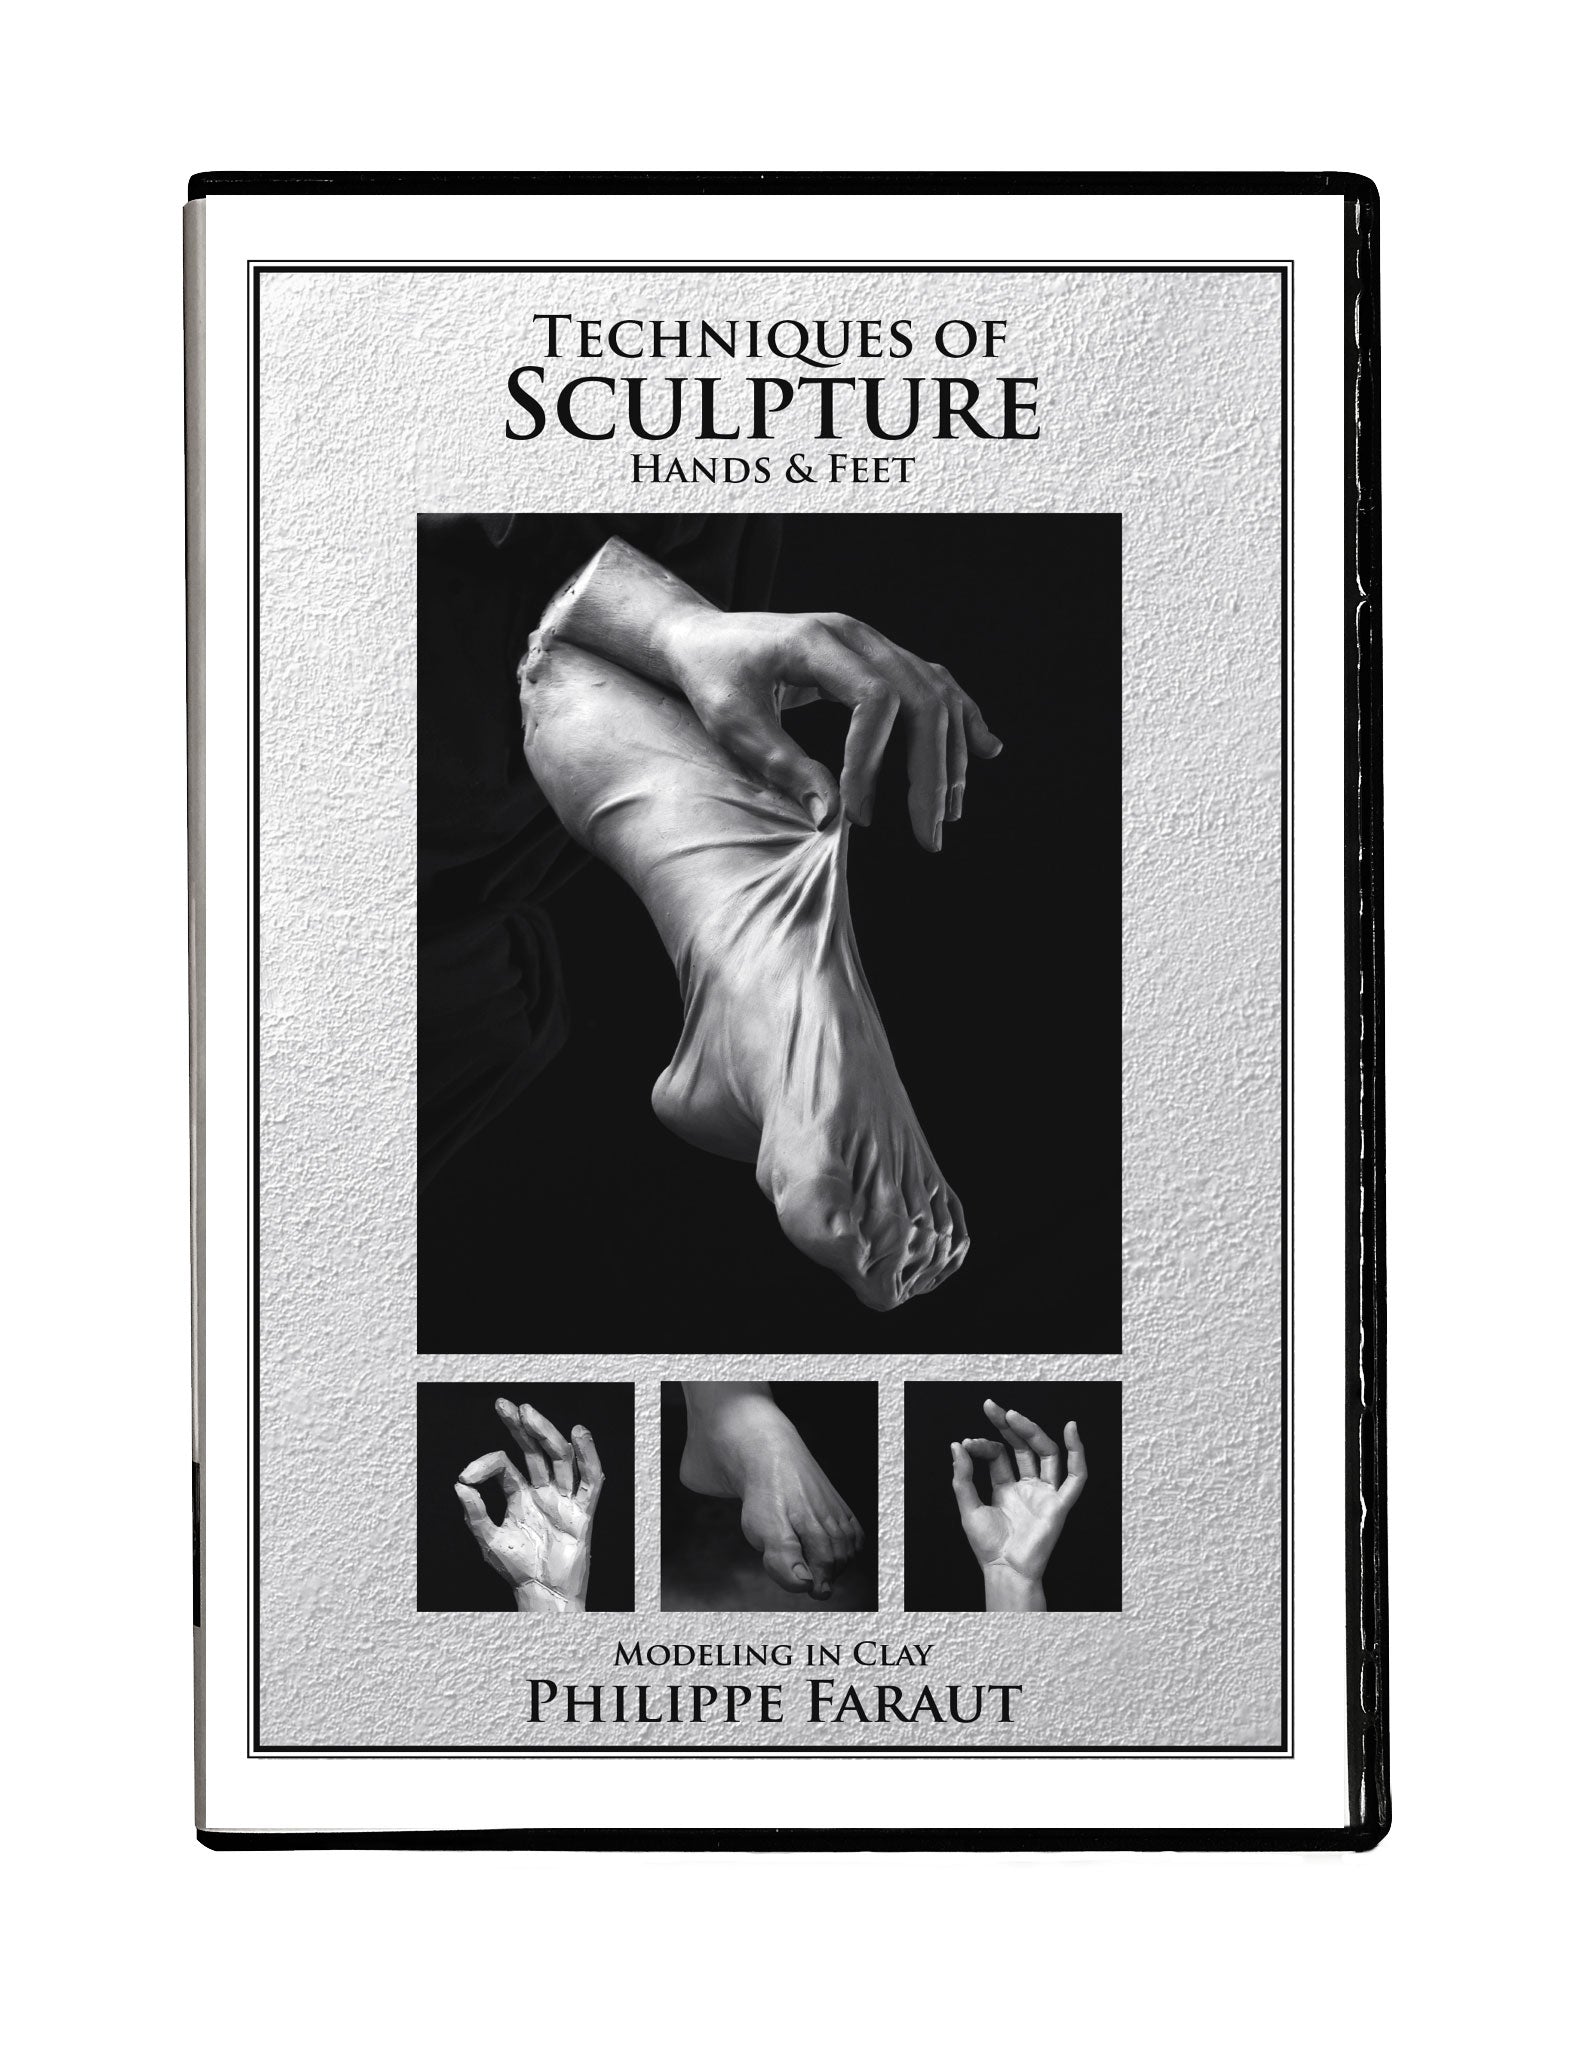 DVD techniques of sculpture volume 3 hands and feet in clay Philippe Faraut 